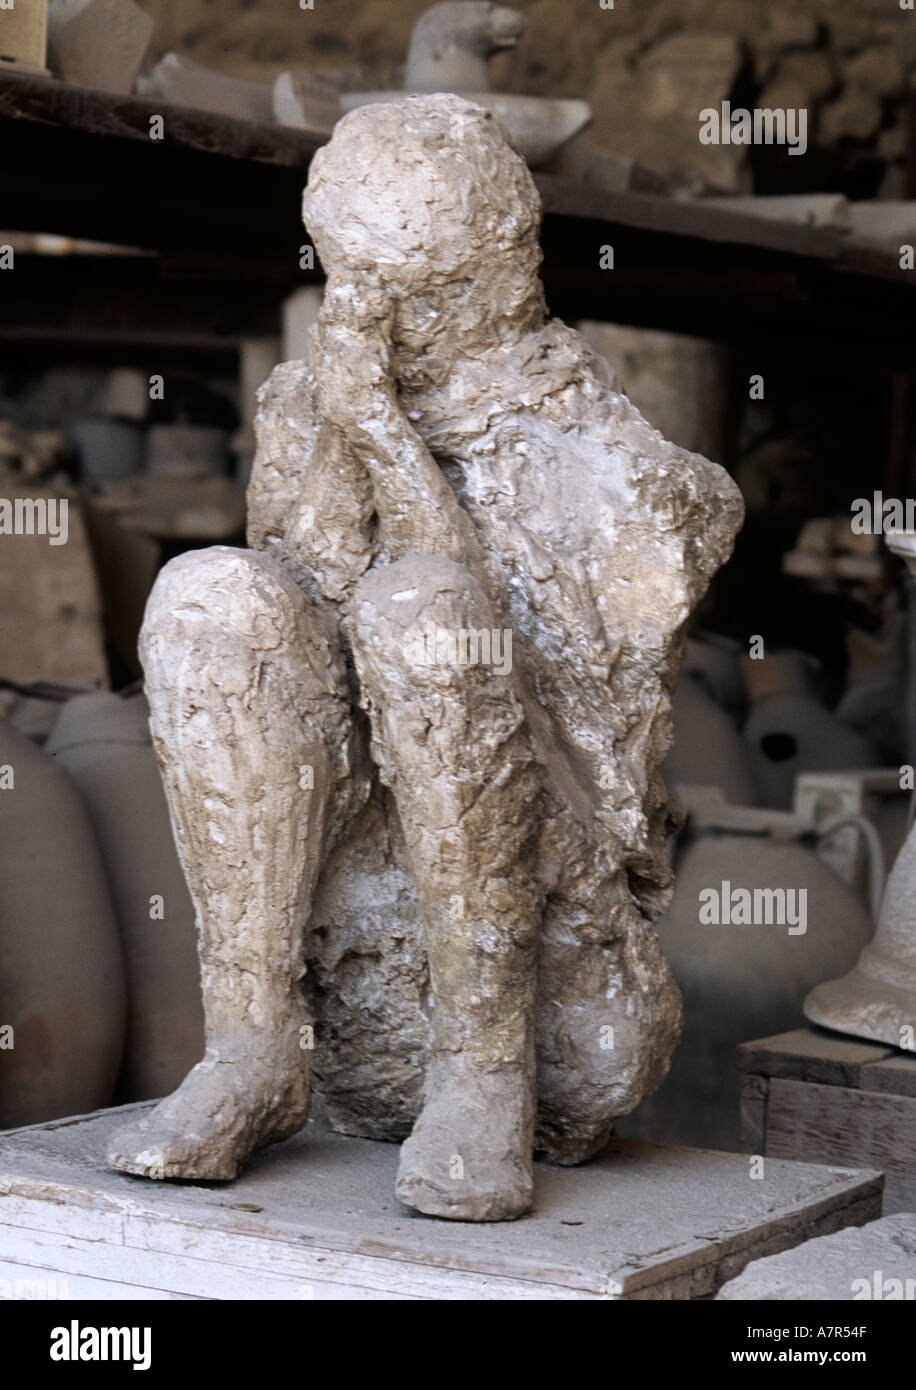 Plaster cast of Citizen of Pompei at archeology collection Pompei Italy Stock Photo